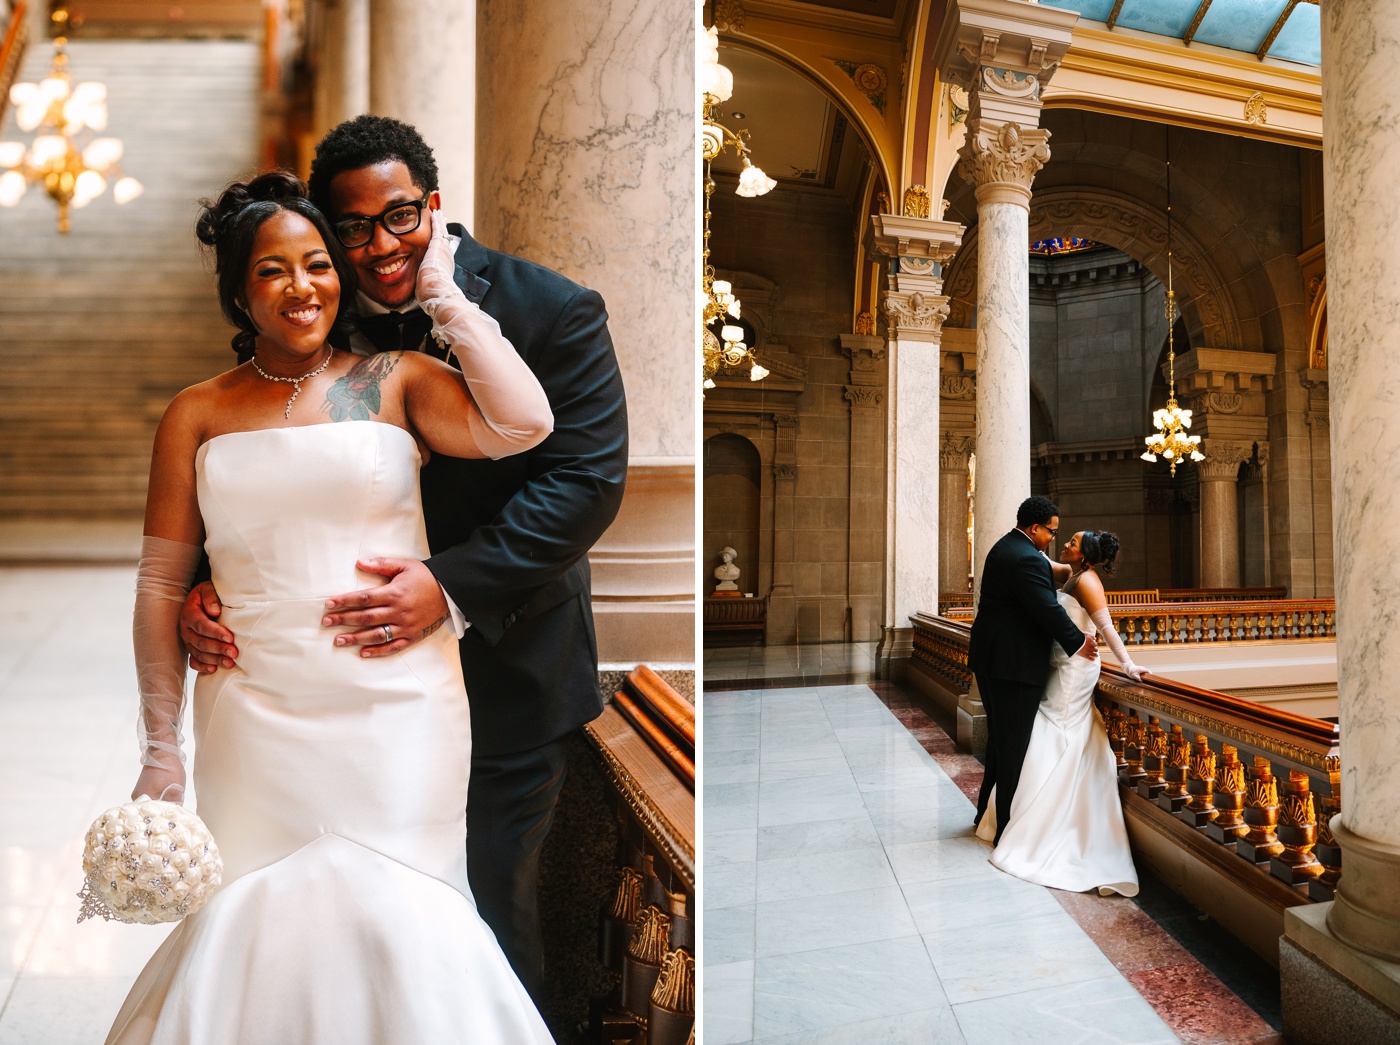 Bridal portraits at the Indiana Statehouse